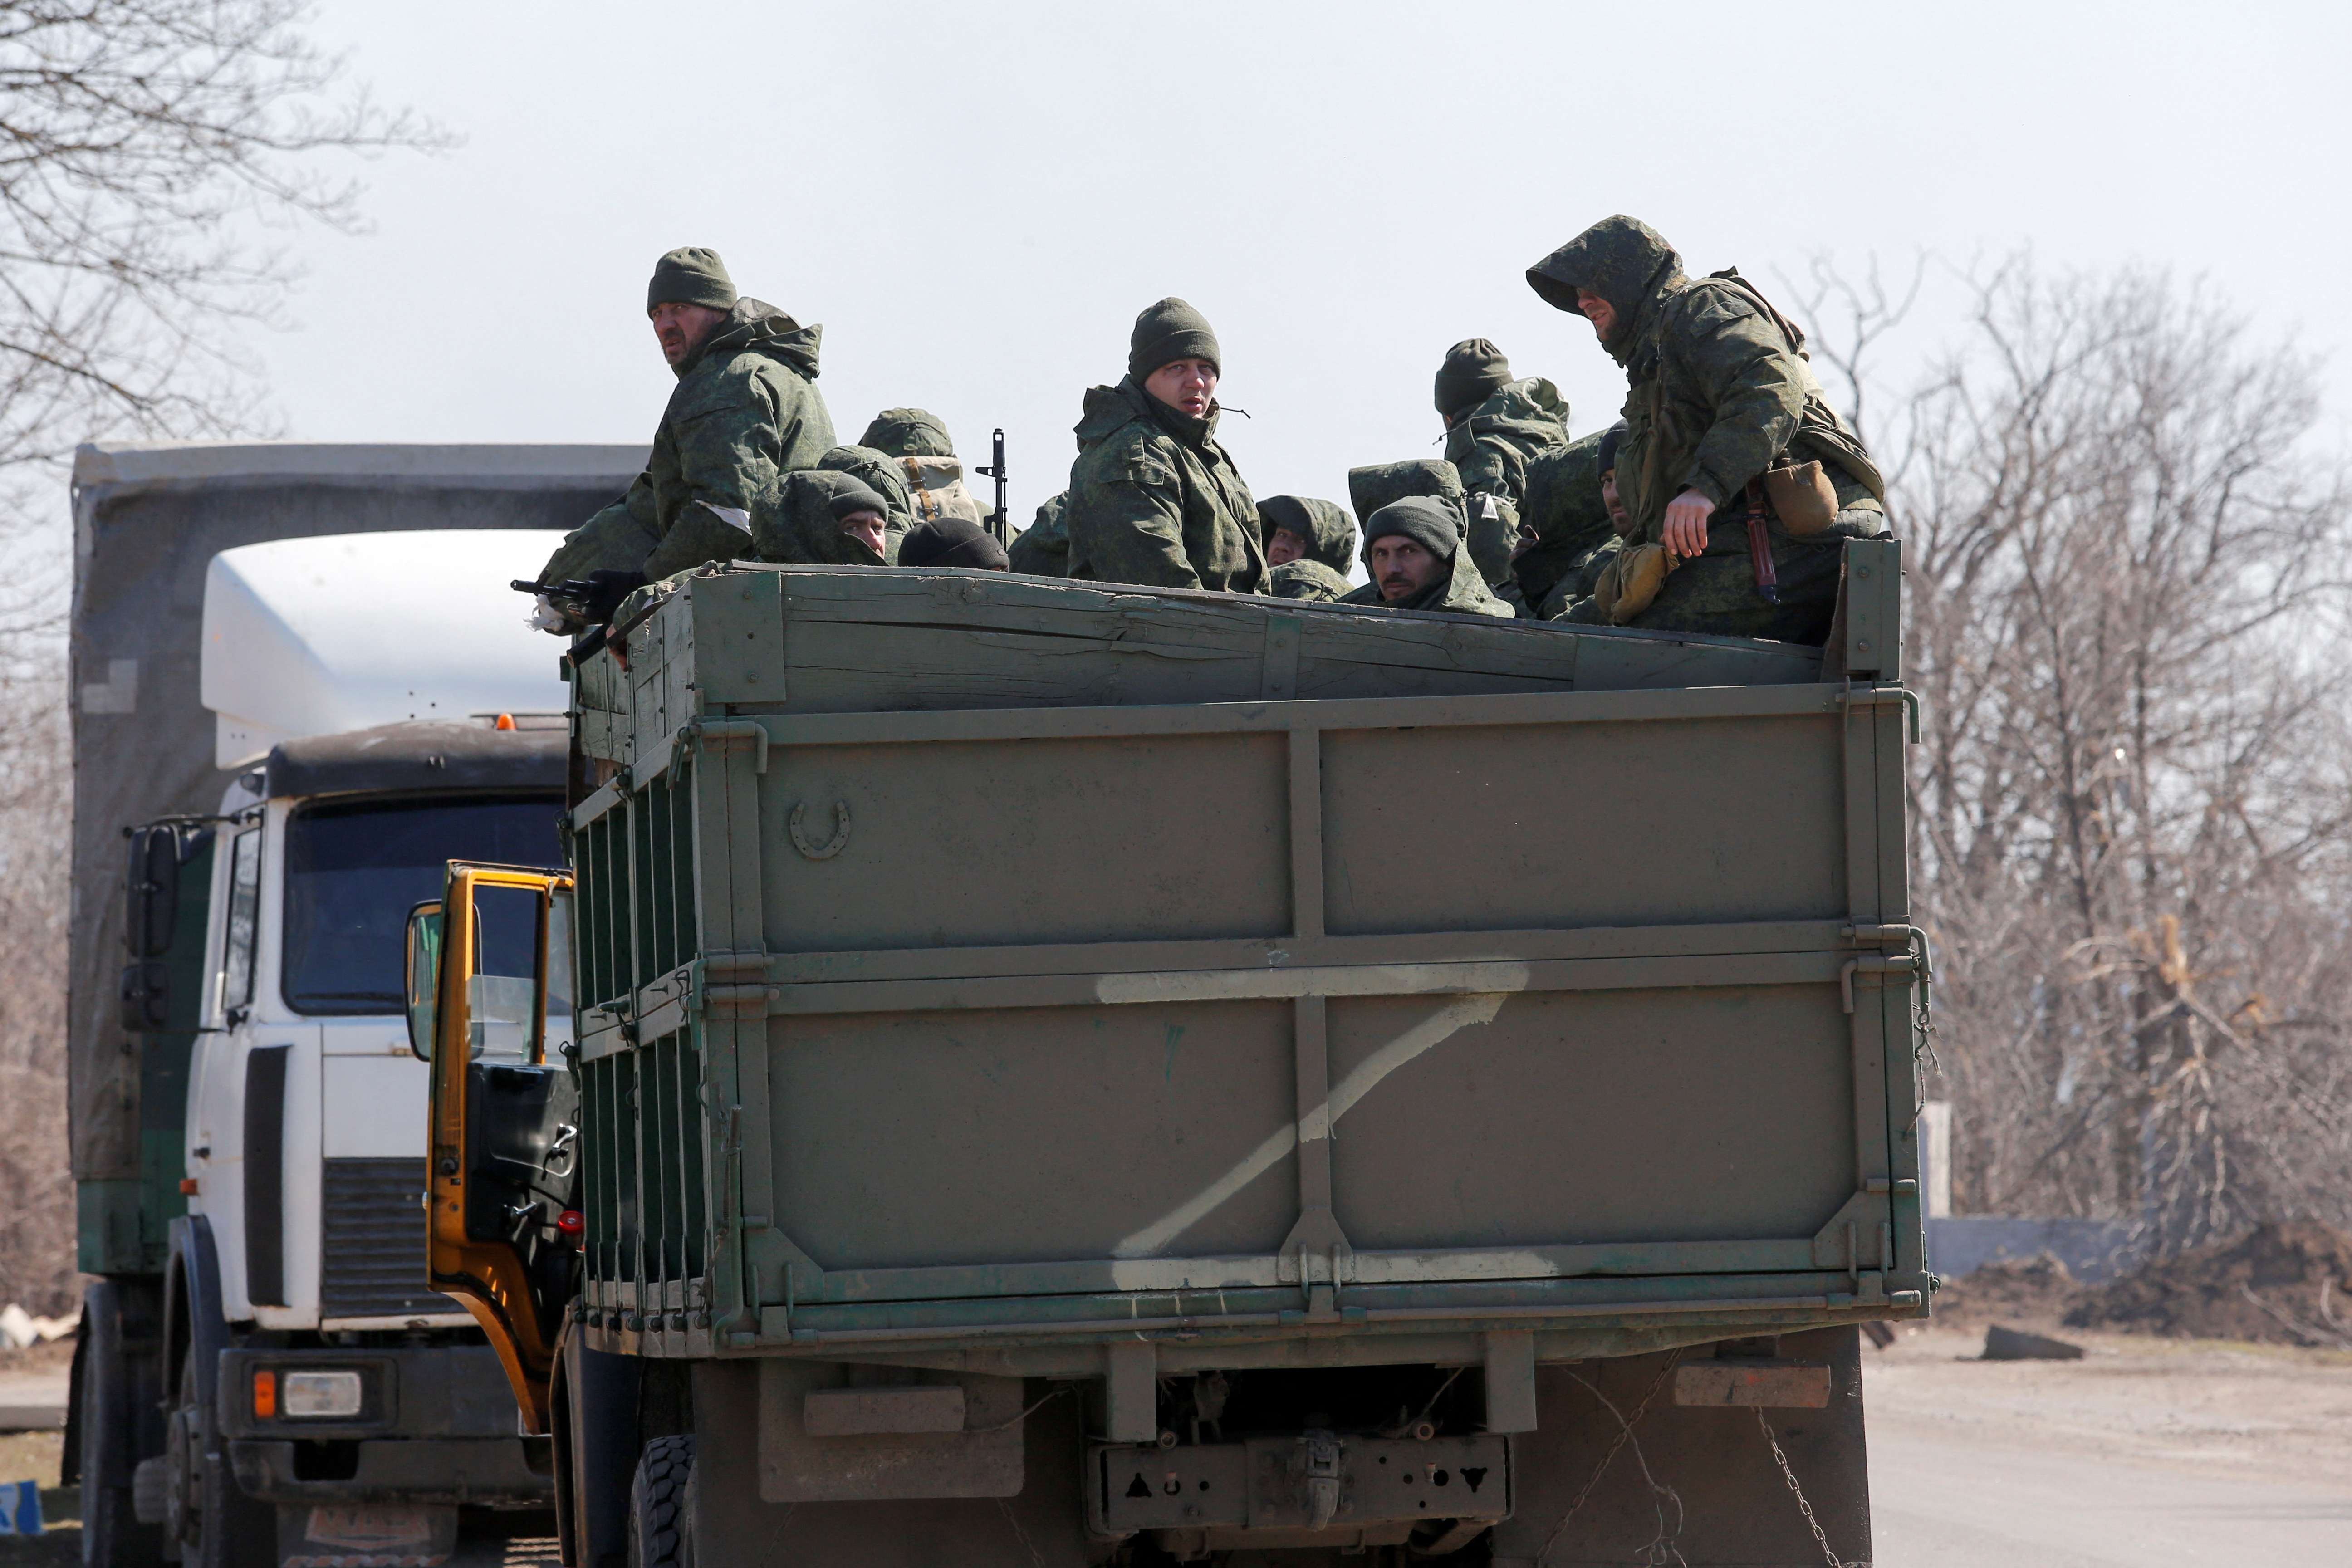 Service members of pro-Russian troops are seen near the besieged city of Mariupol